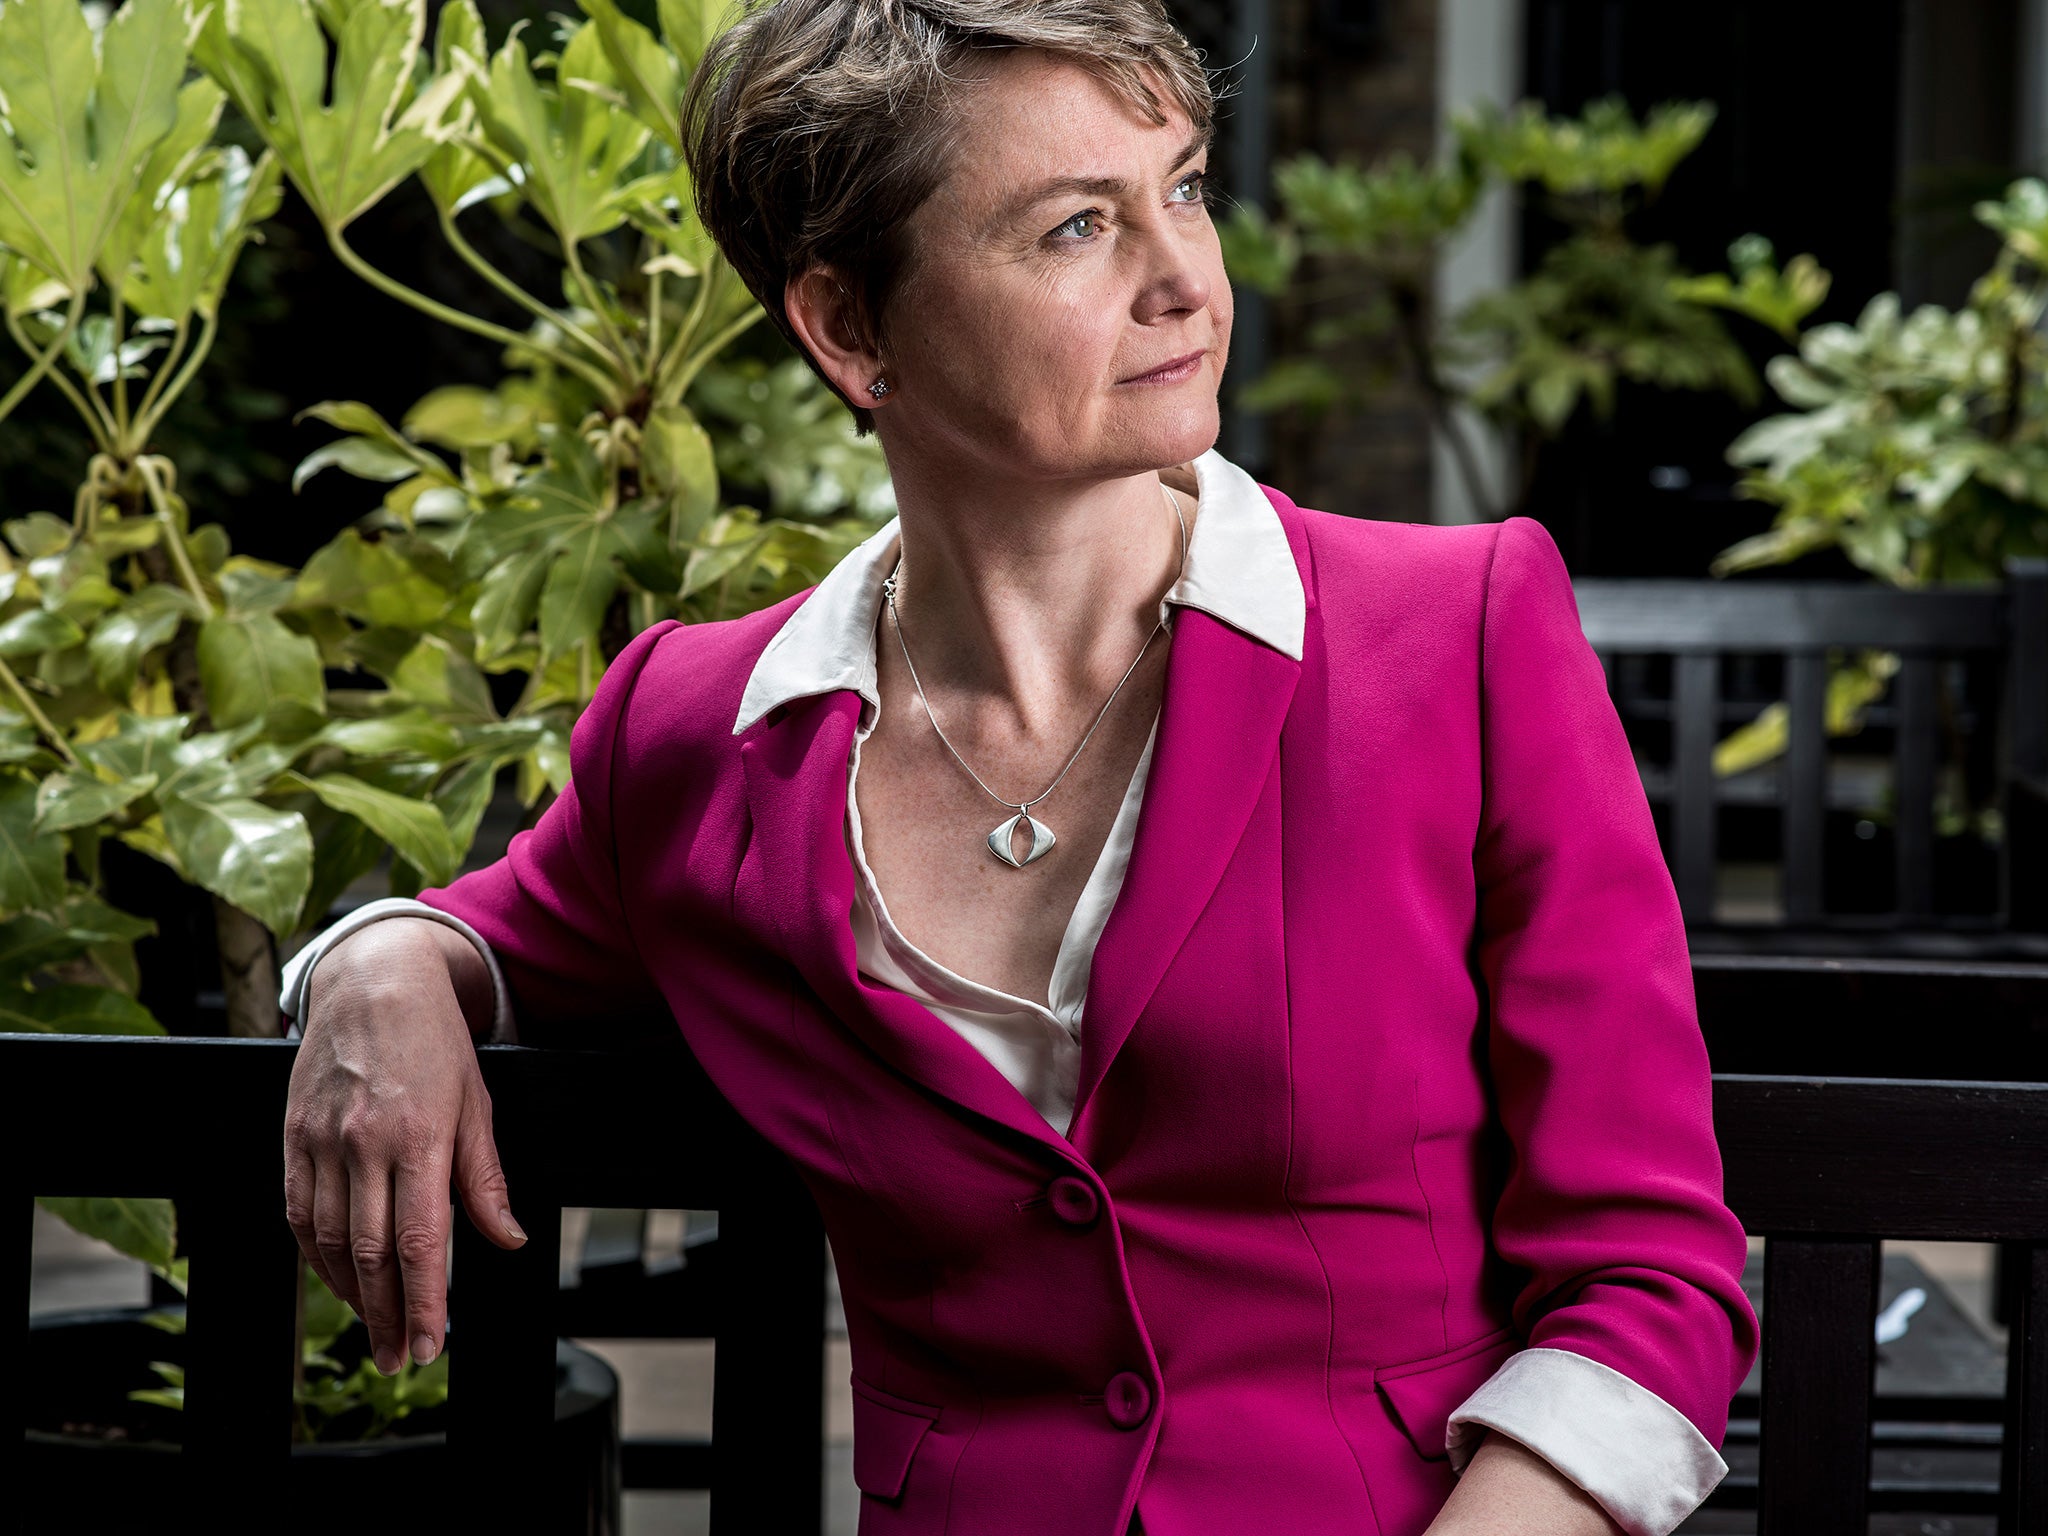 Yvette Cooper Frightening Levels Of Sexist Abuse Risk